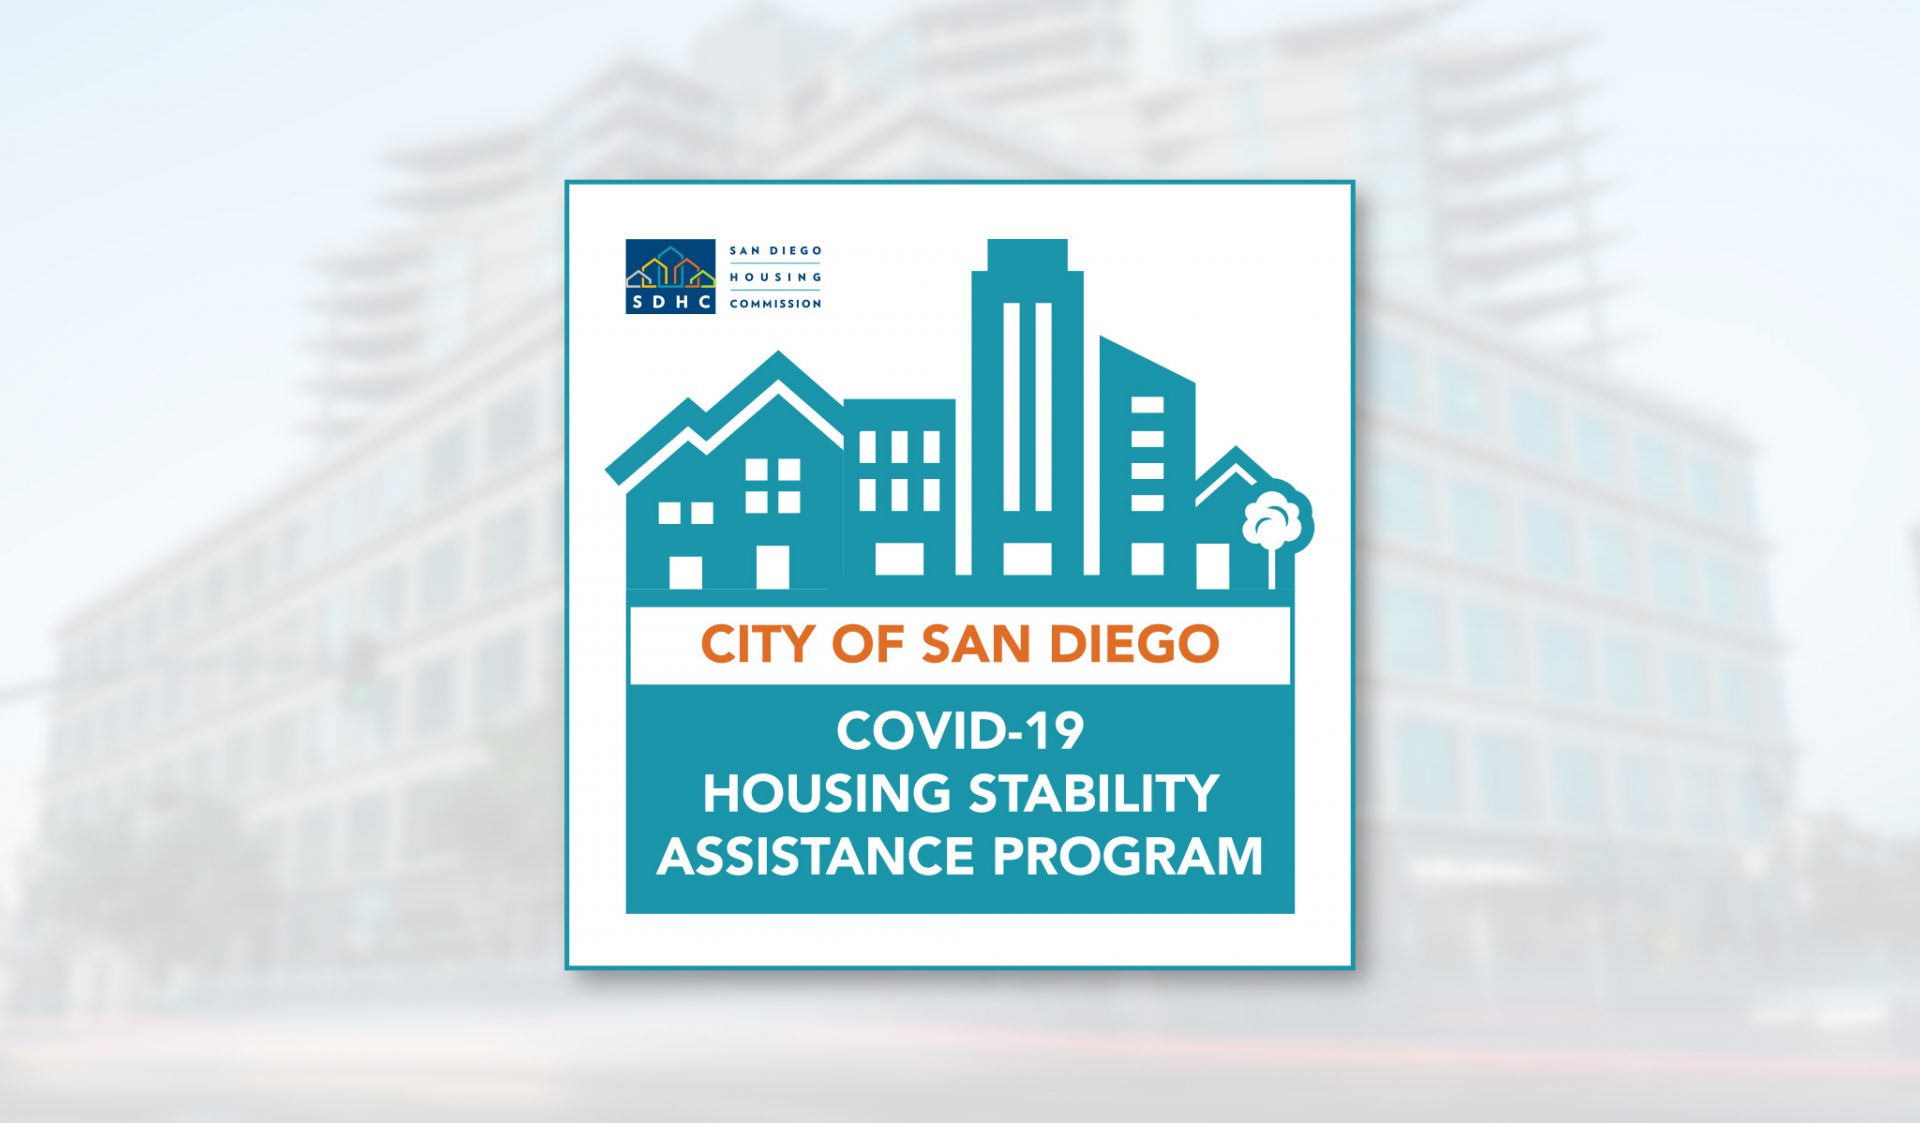 COVID-19 Housing Stability Assistance Program to Receive $8.3 Million in Additional Federal Funds